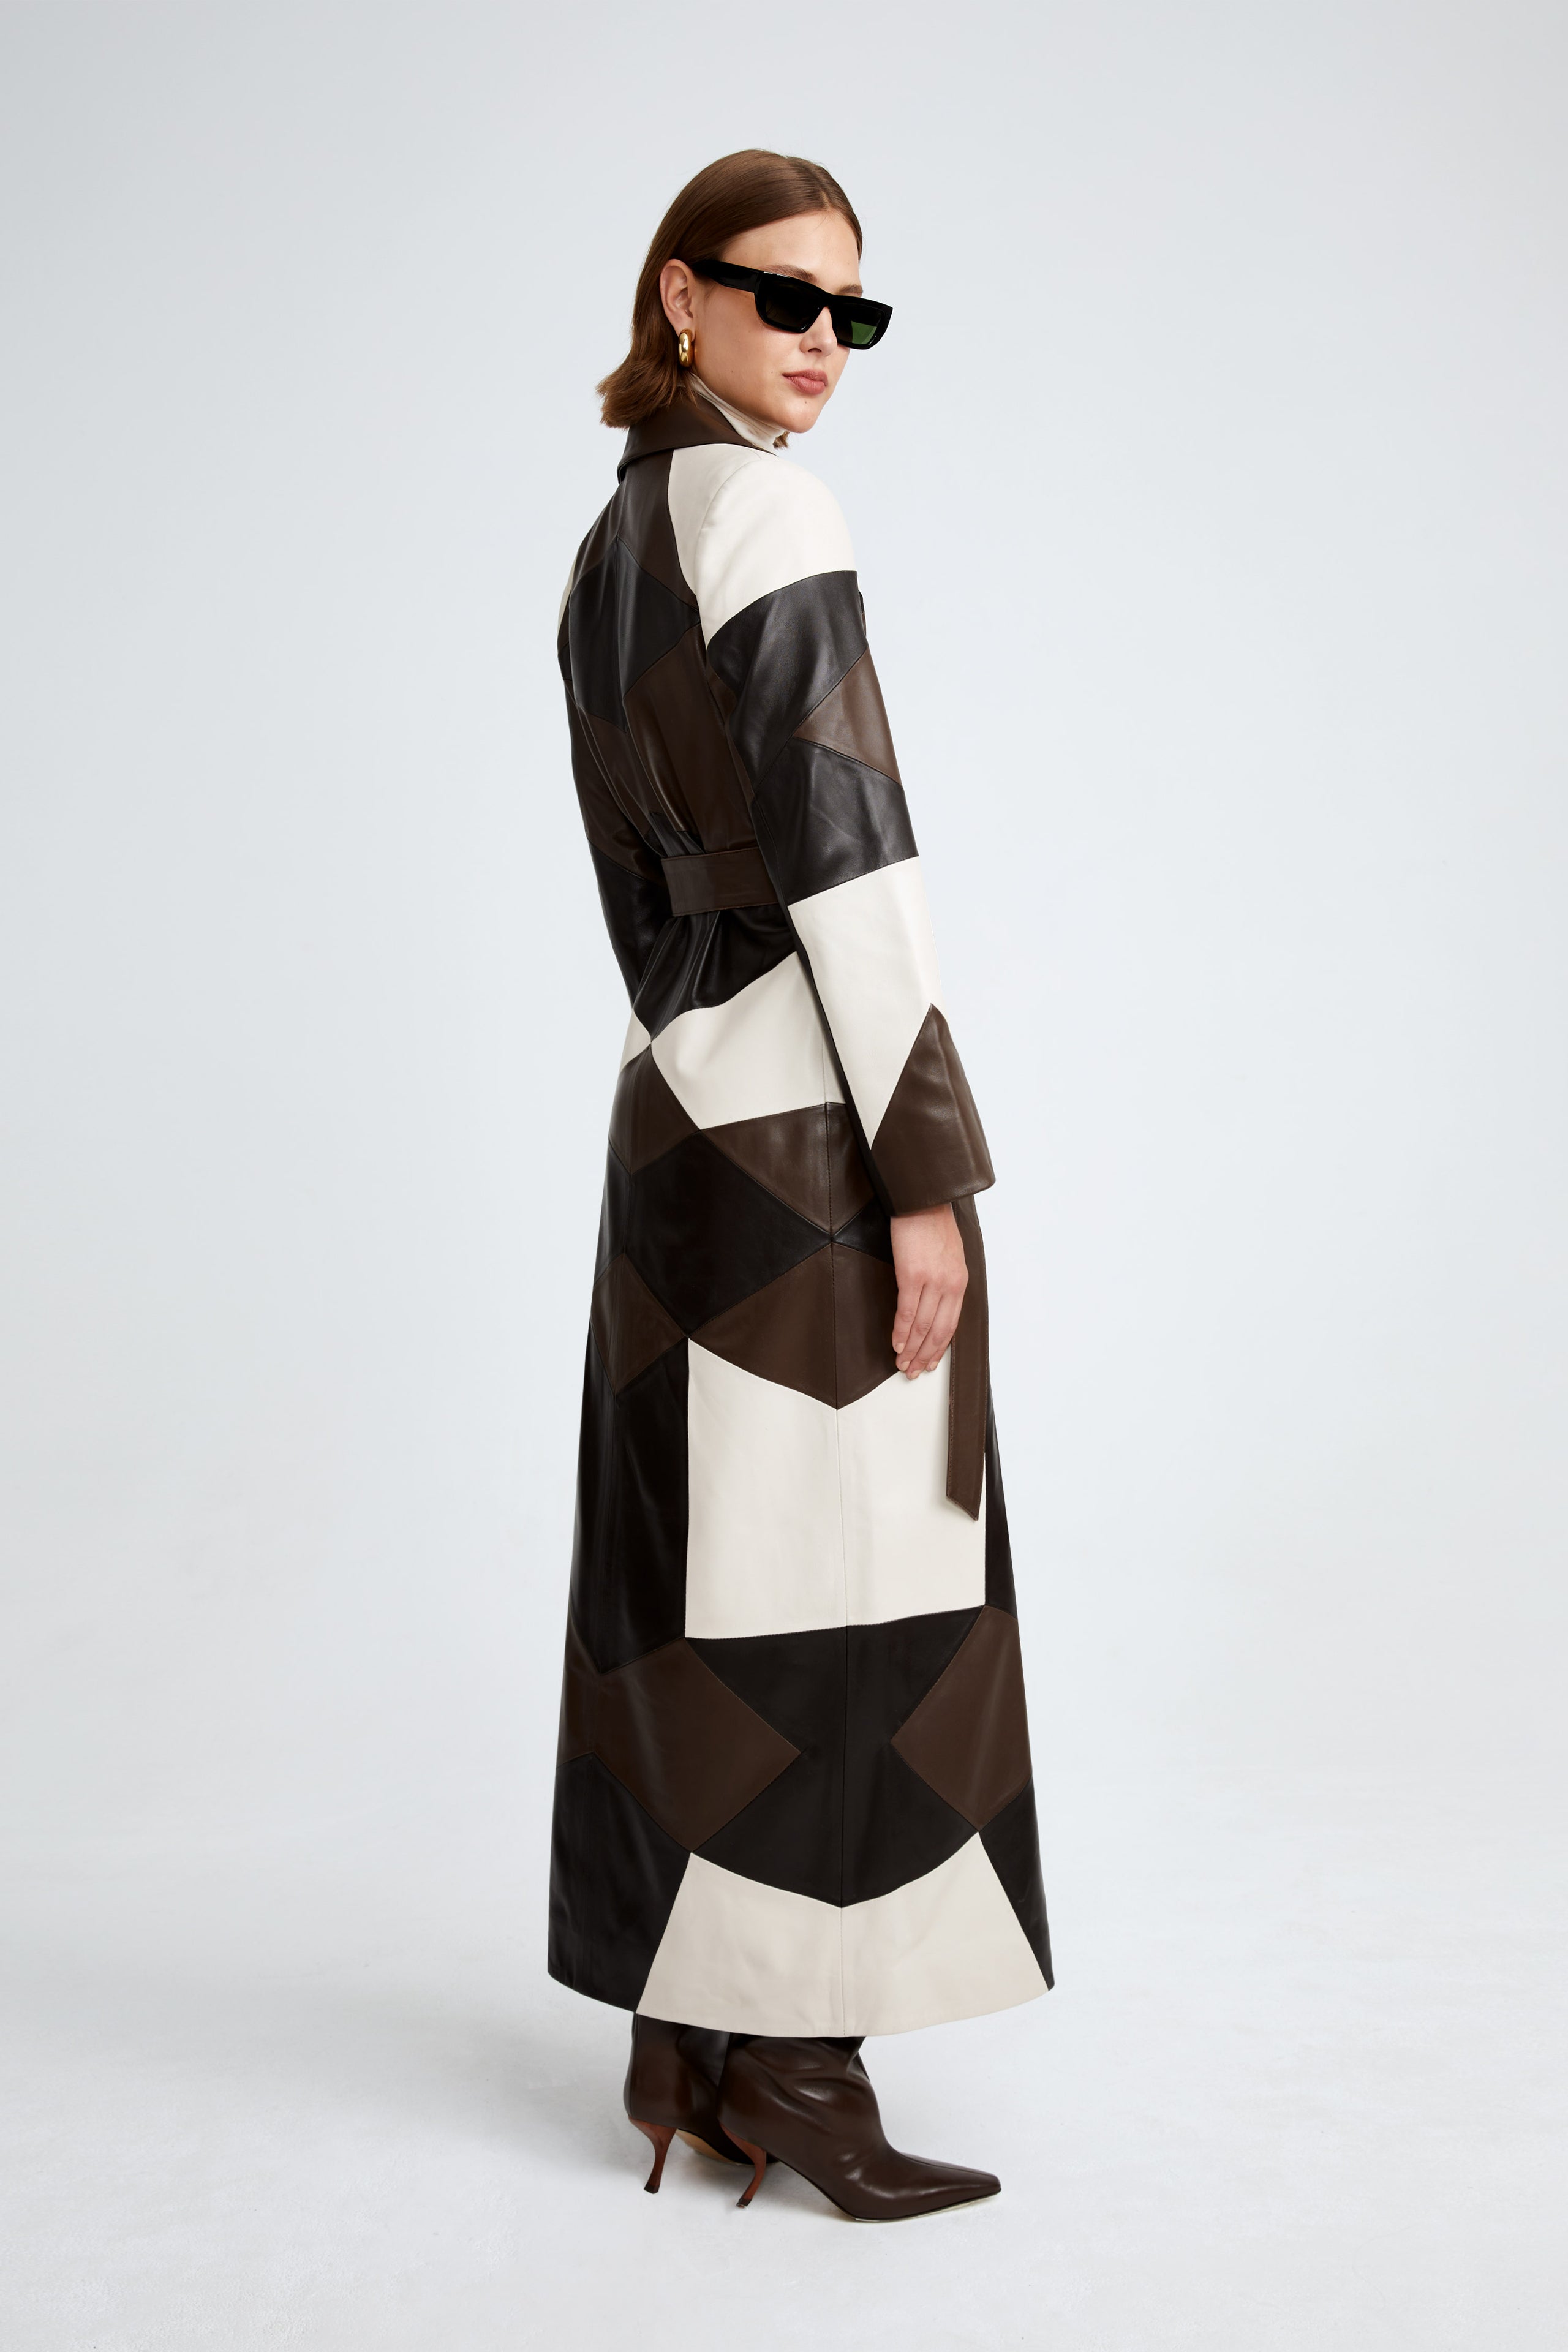 Model is wearing the Sonja Cocoa Vanilla Brown Patchwork Leather Trench Side